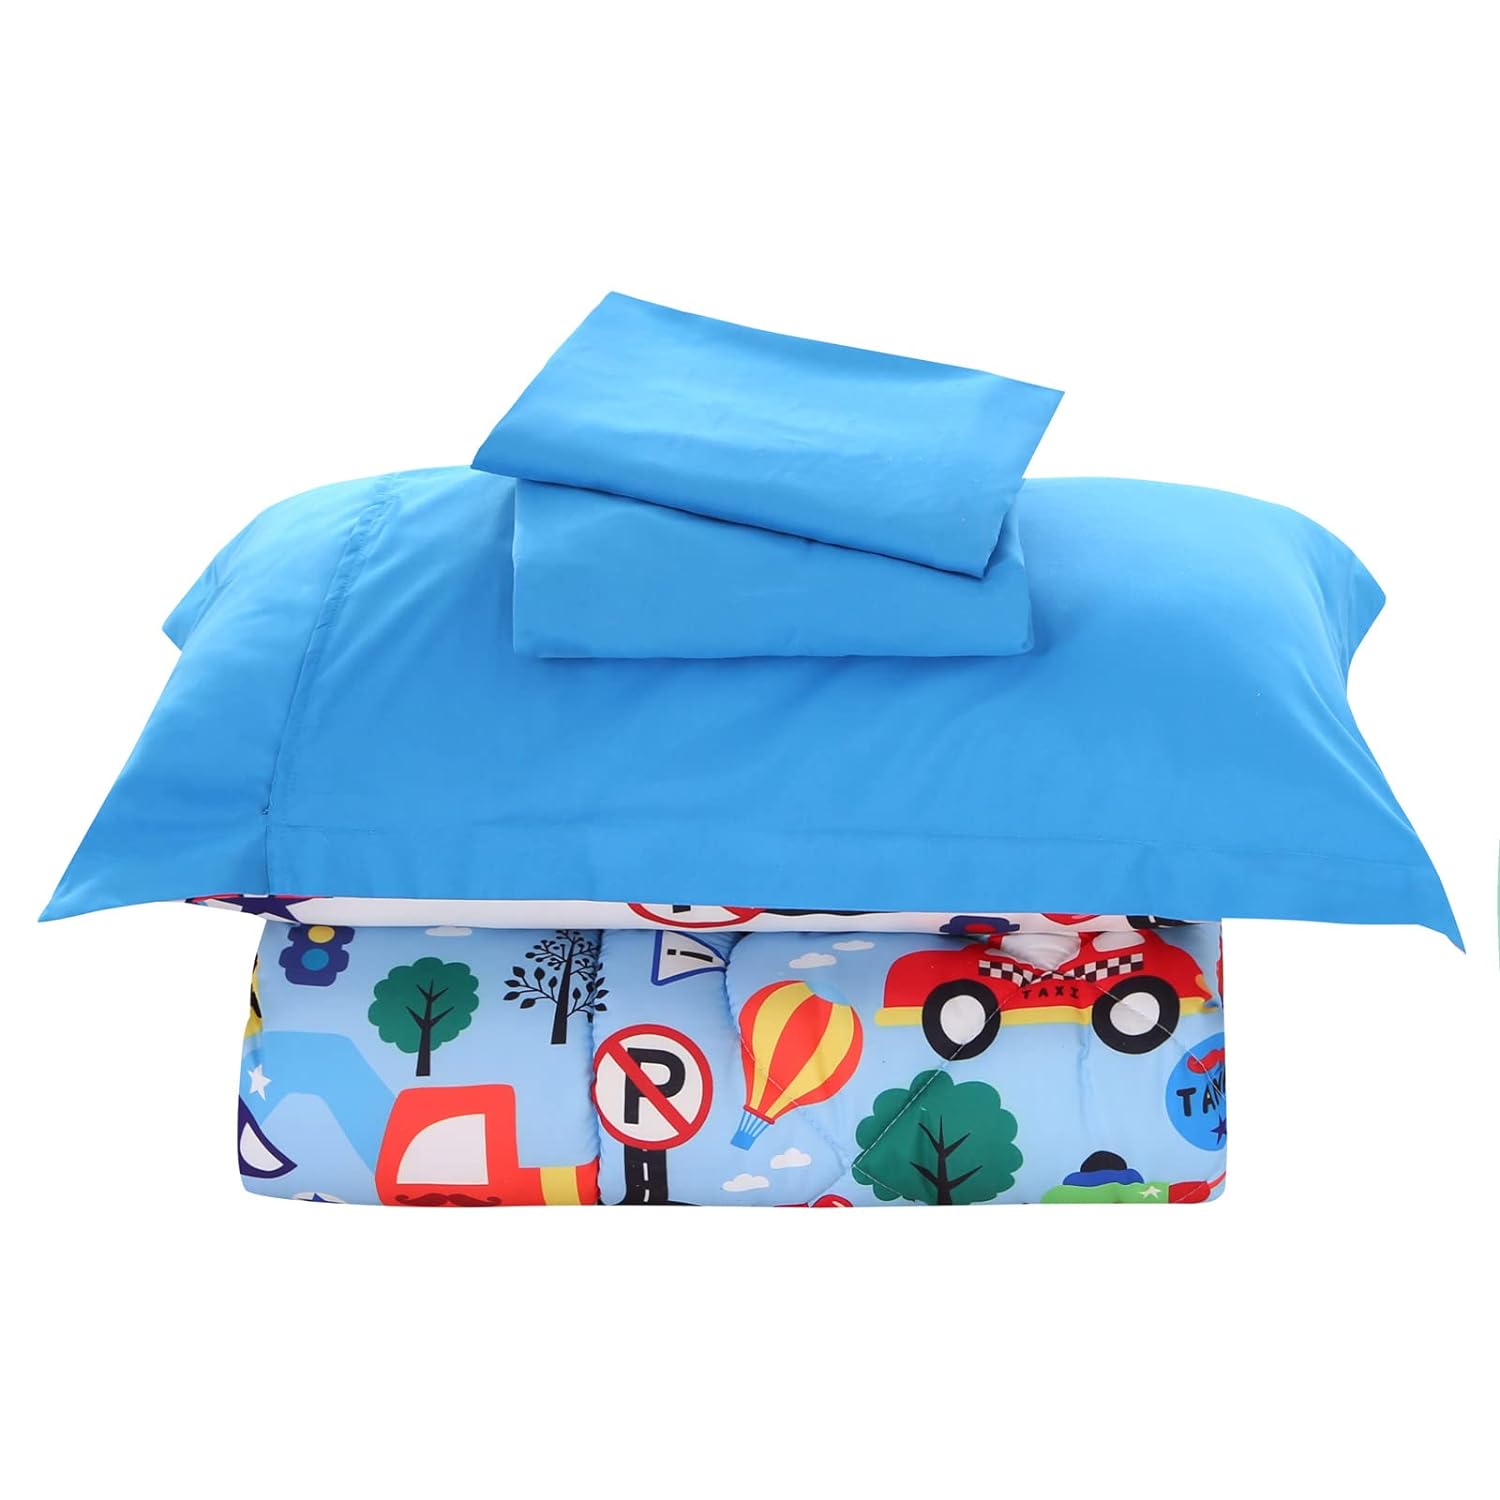 Great Choice Products Car Toddler Bedding Sets For Boys Blue, Premium 4 Piece Car Toddler Bed Sets For Boys And Girls, Super Soft And Comfortable F…